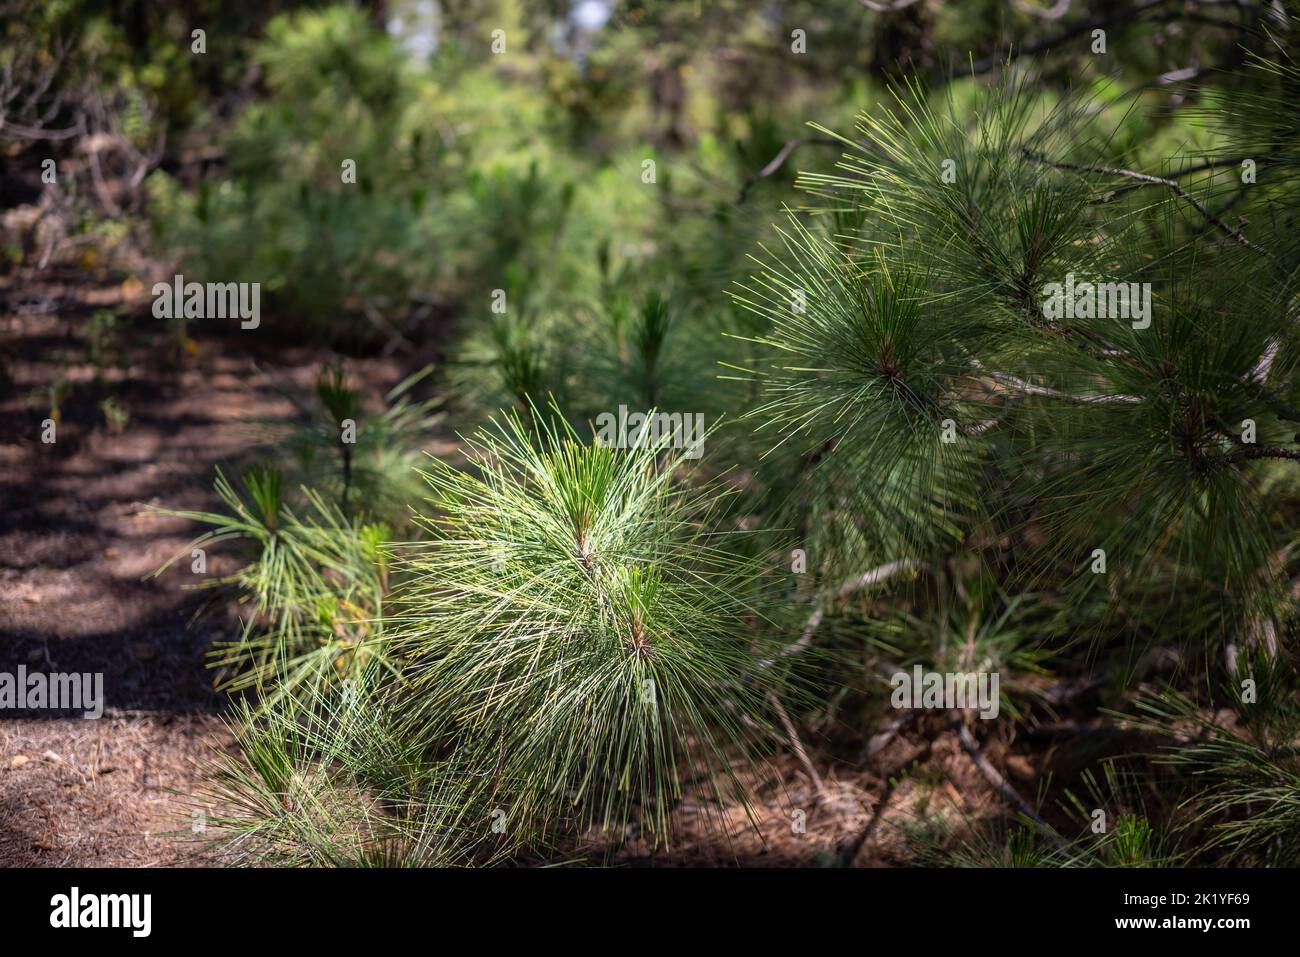 Pinus canariensis or the Canary Island pine young shoots background Stock Photo